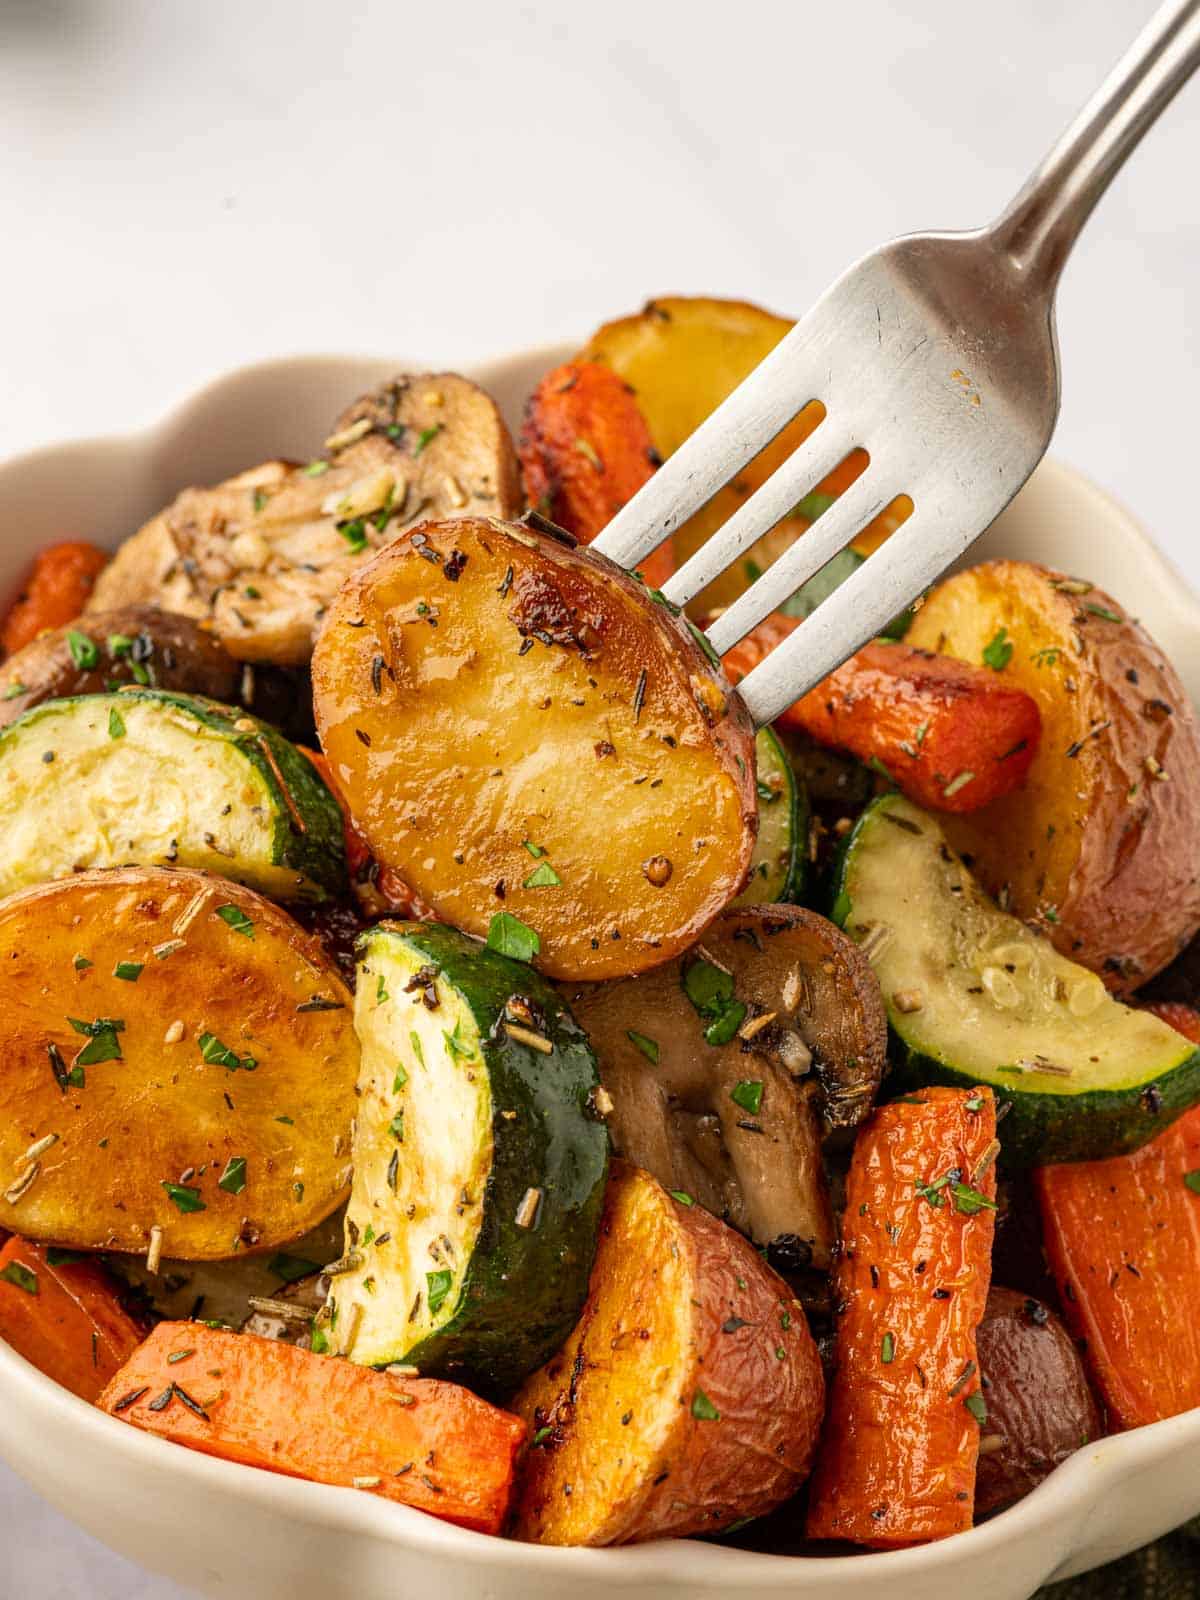 A fork picks up a roasted potato from a bowl of roasted vegetables.